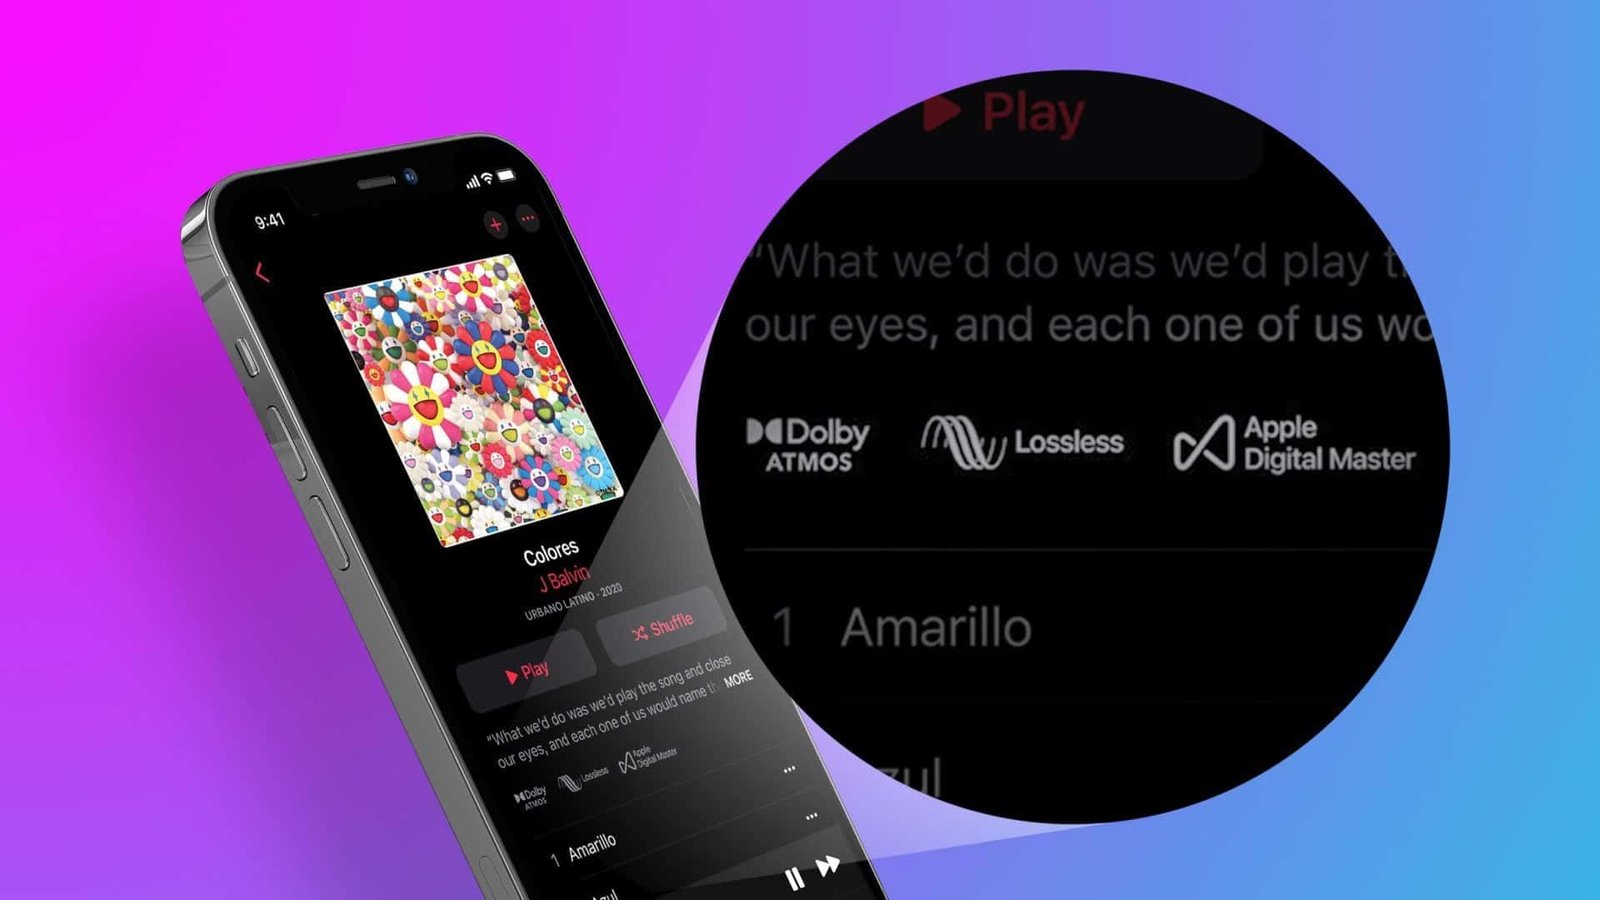 Apple Music Spatial Audio and Lossless audio support are coming to Android as well_Tech2Sports.com